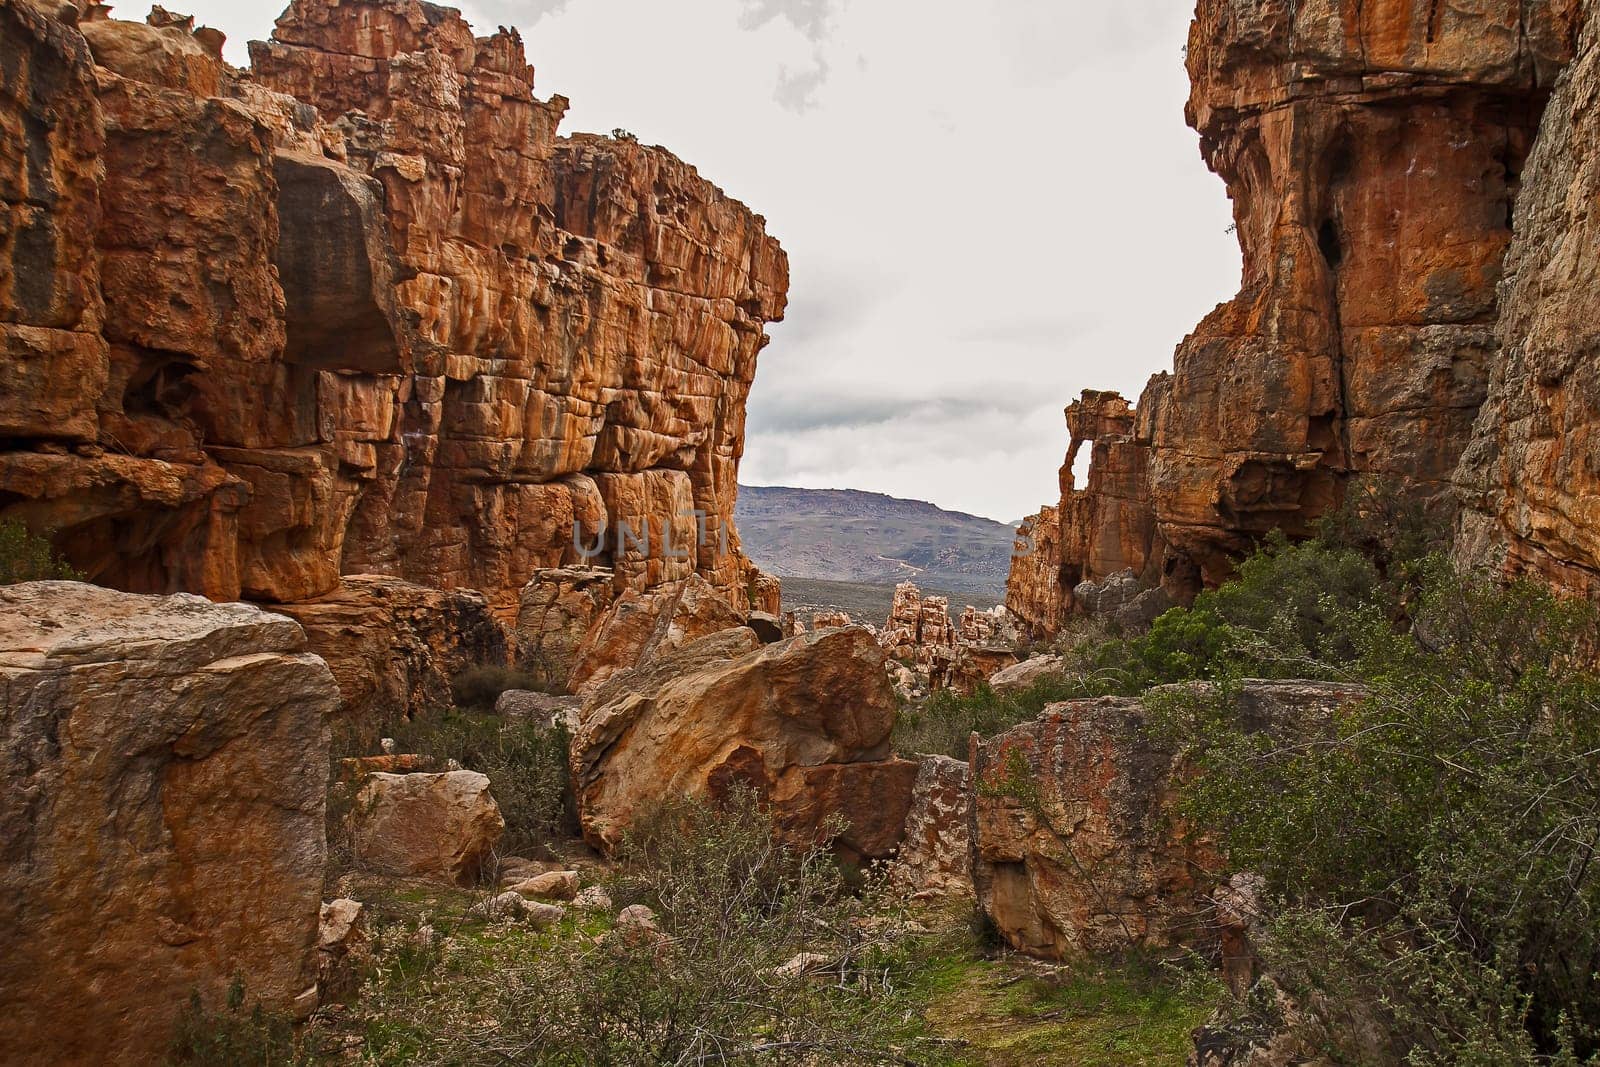 Cederberg Rock Formations 12906 by kobus_peche